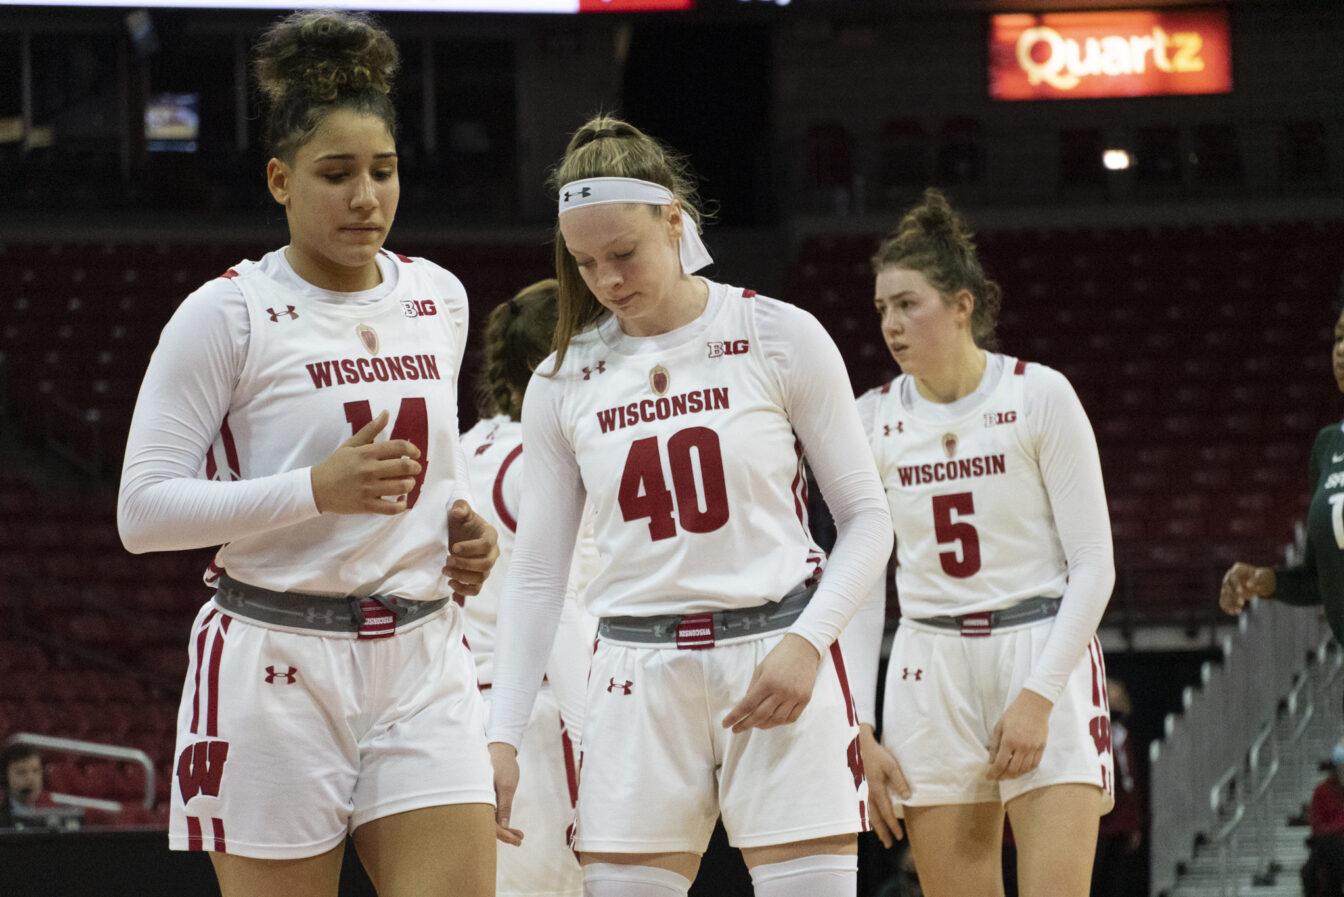 Womens+basketball%3A+Badgers+return+to+the+Kohl+Center+for+second+meeting+with+stout+Nebraska+team